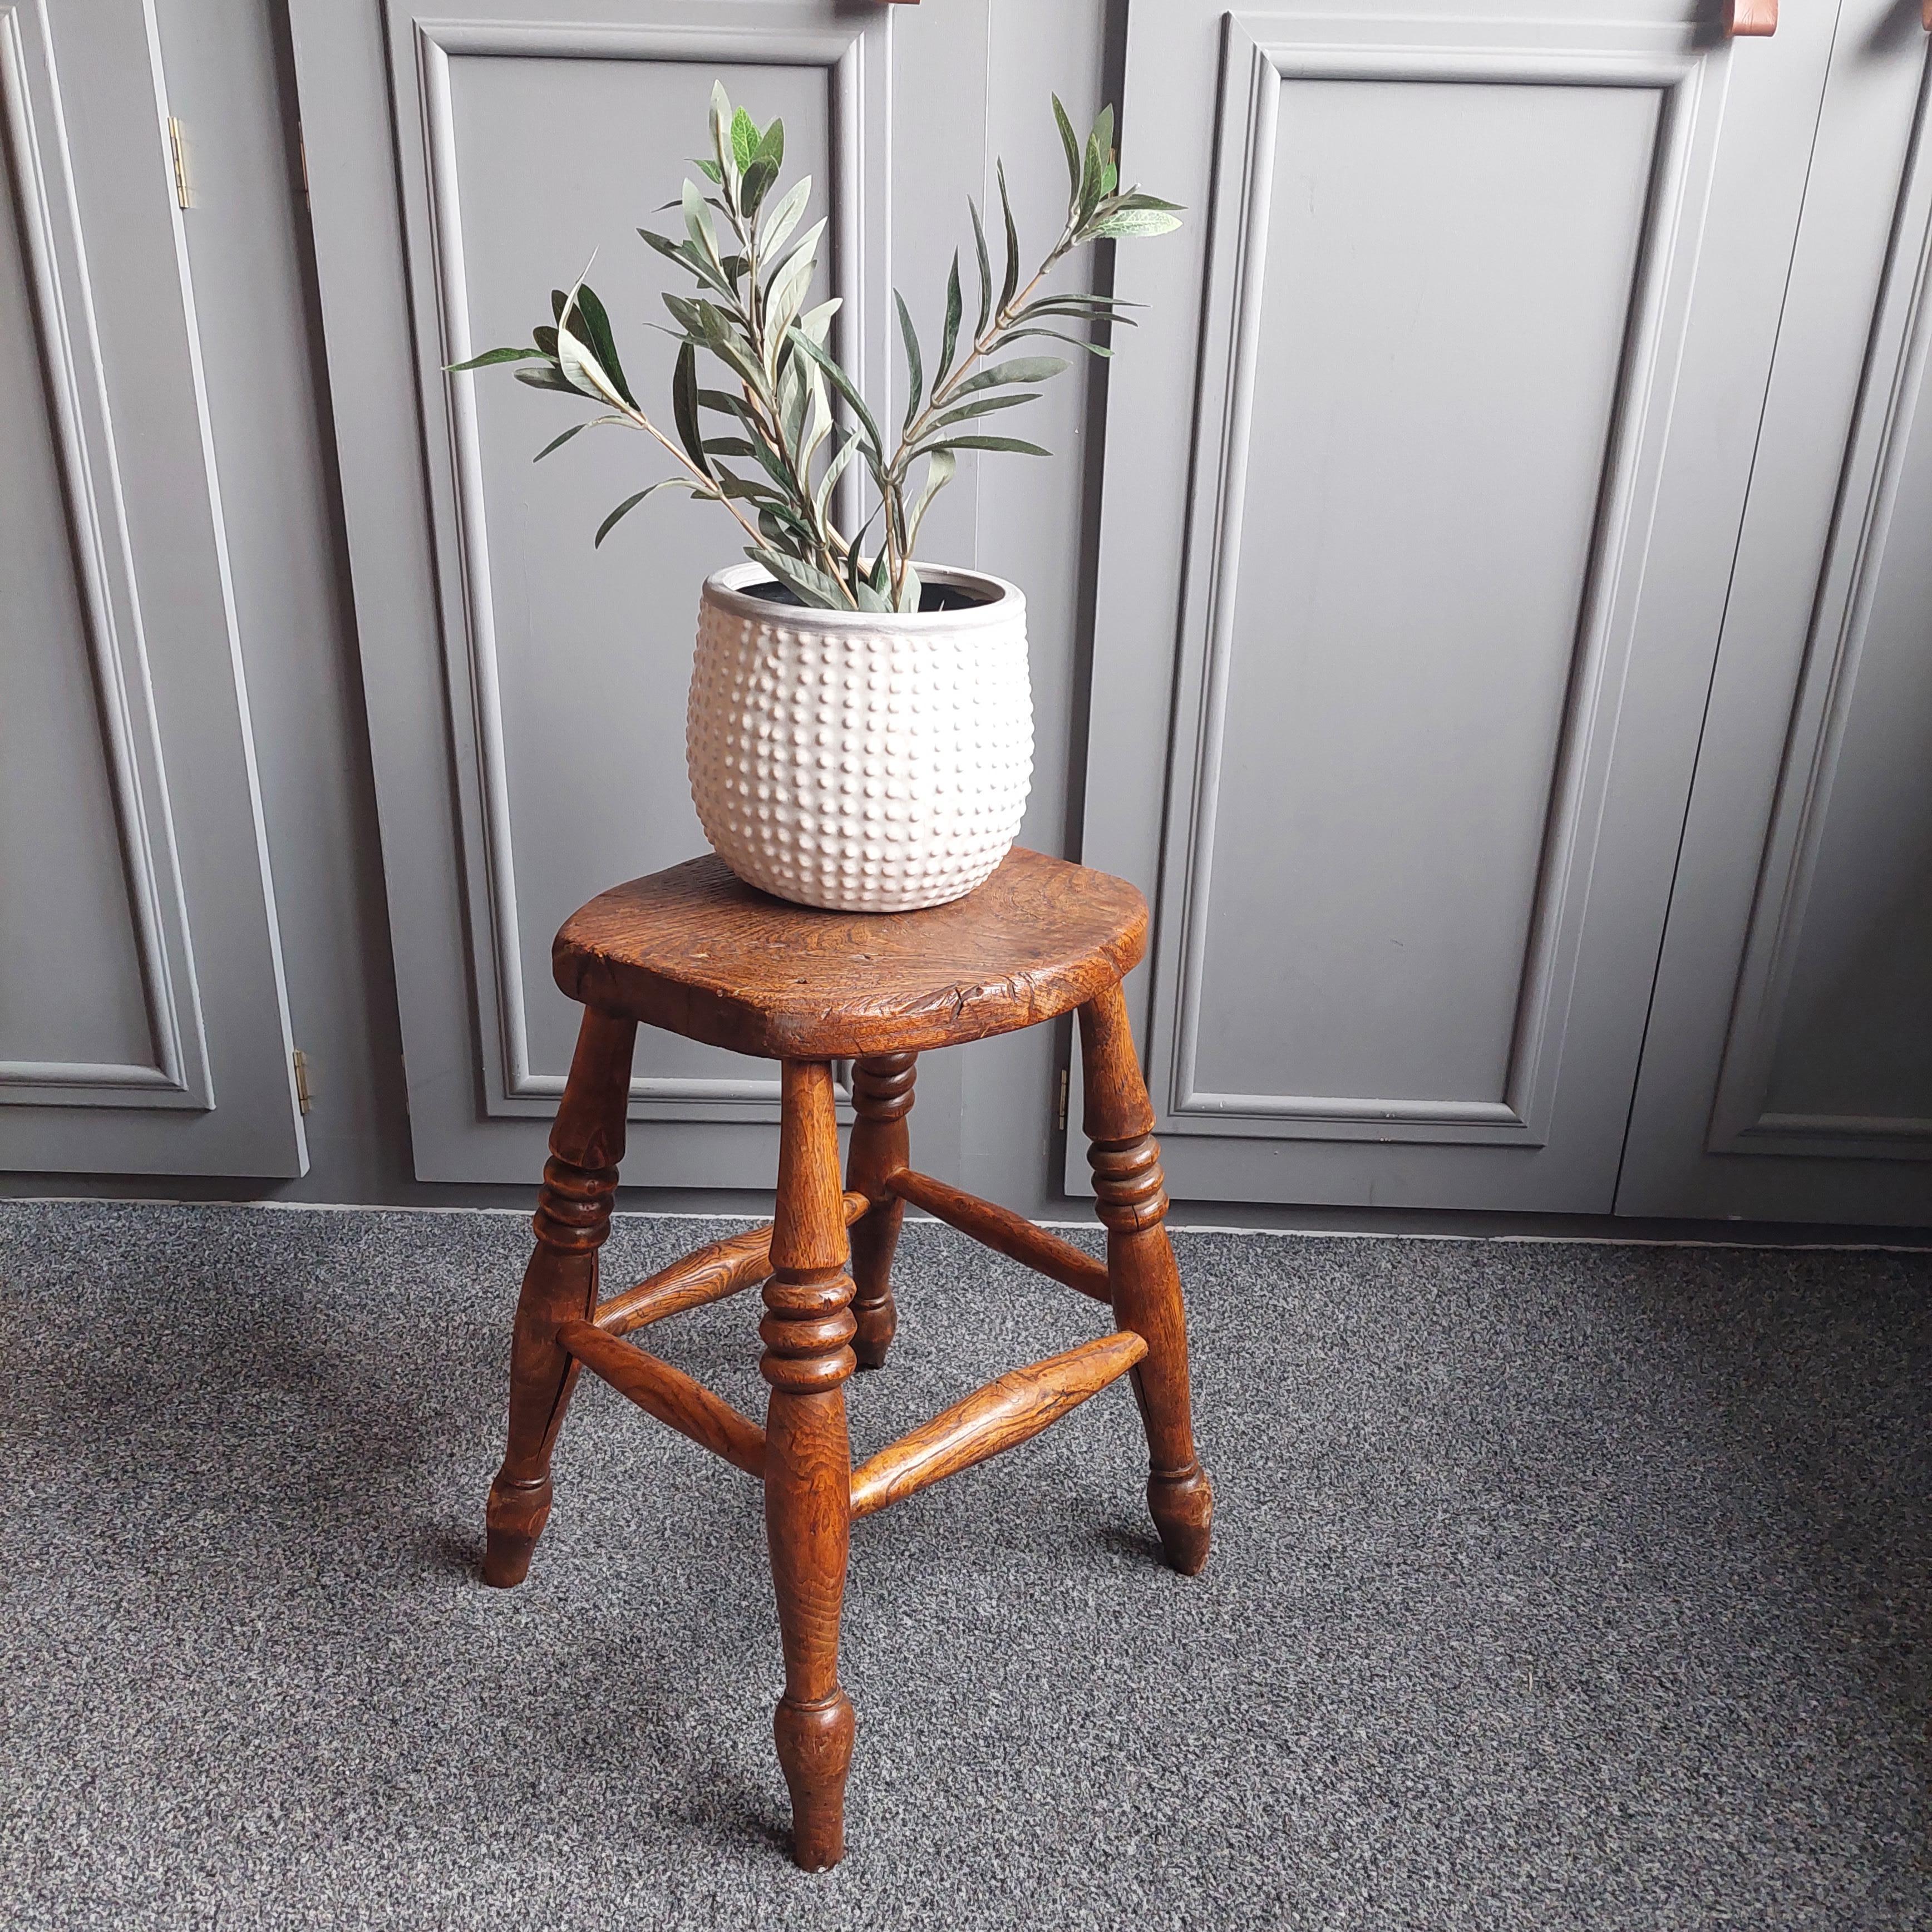 A lovely Victorian vernacular Elm stool.
Probably early 1900s

With marvelous age and wear.
Having ring turned legs and well worn seat.
Seat with nearly oval shape.
Four legged stools with stretchers

A great looking stool that would compliment and